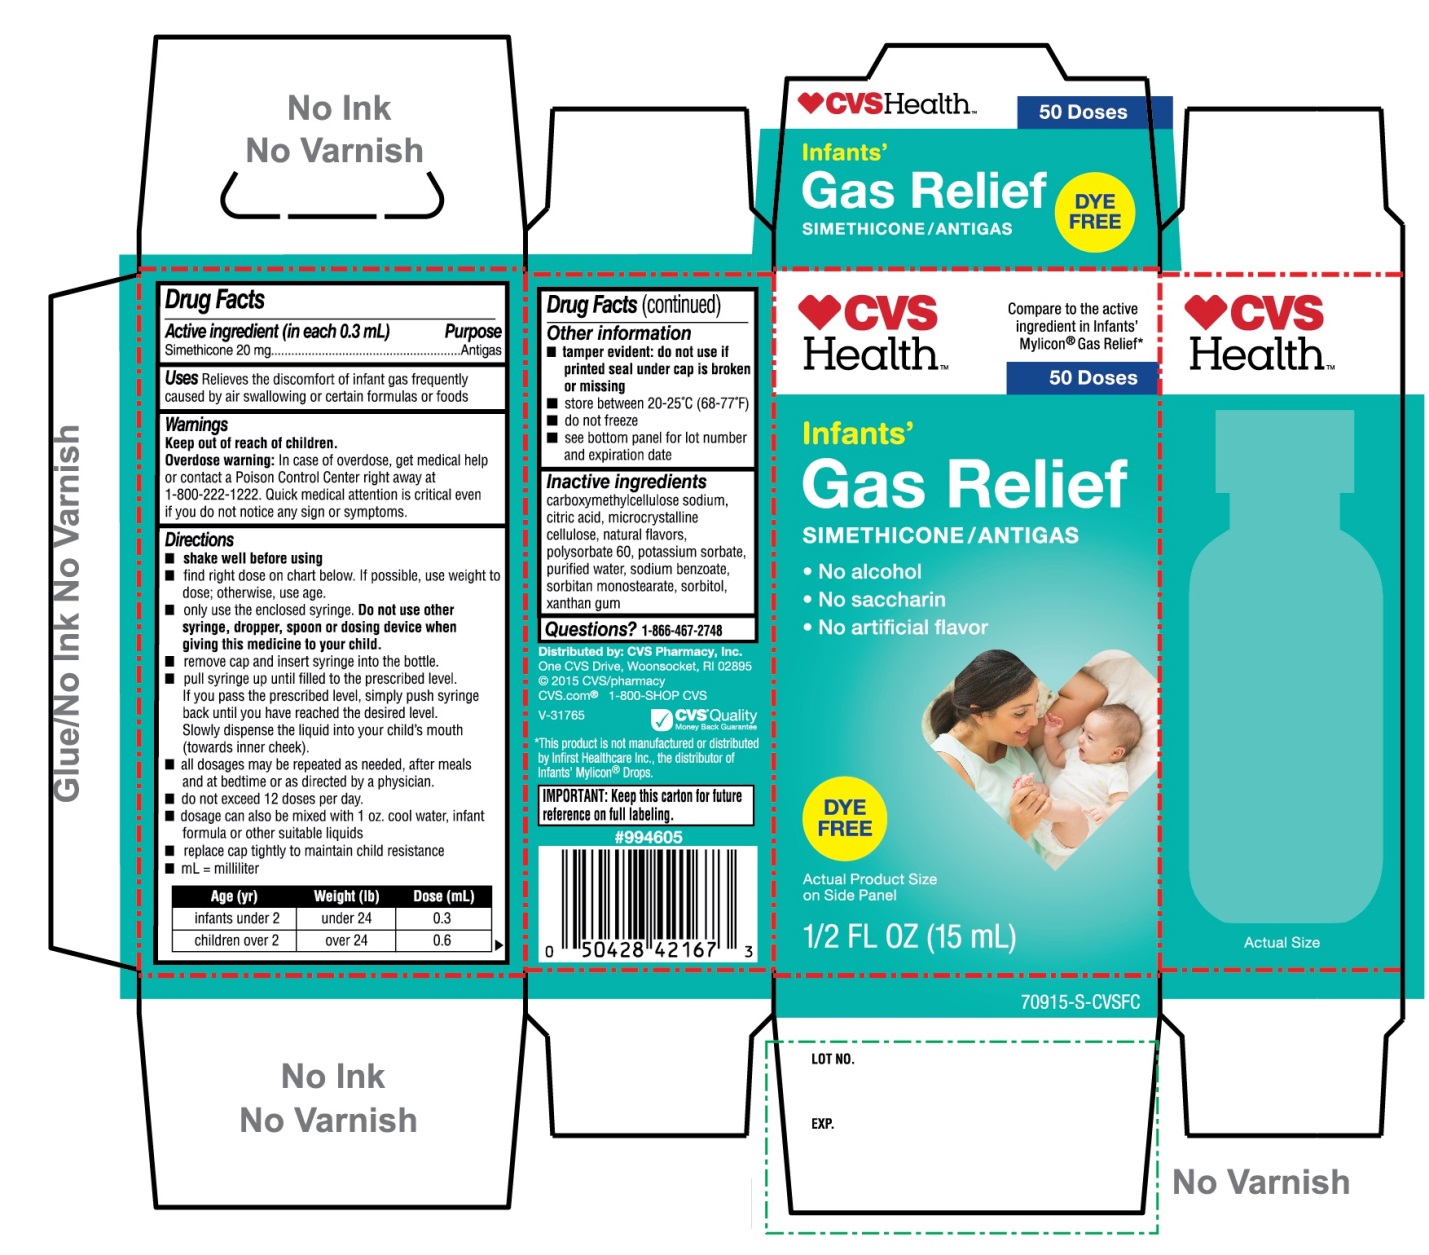 Package Label for Infants Gas Relief Dye Free Formula 50 Doses